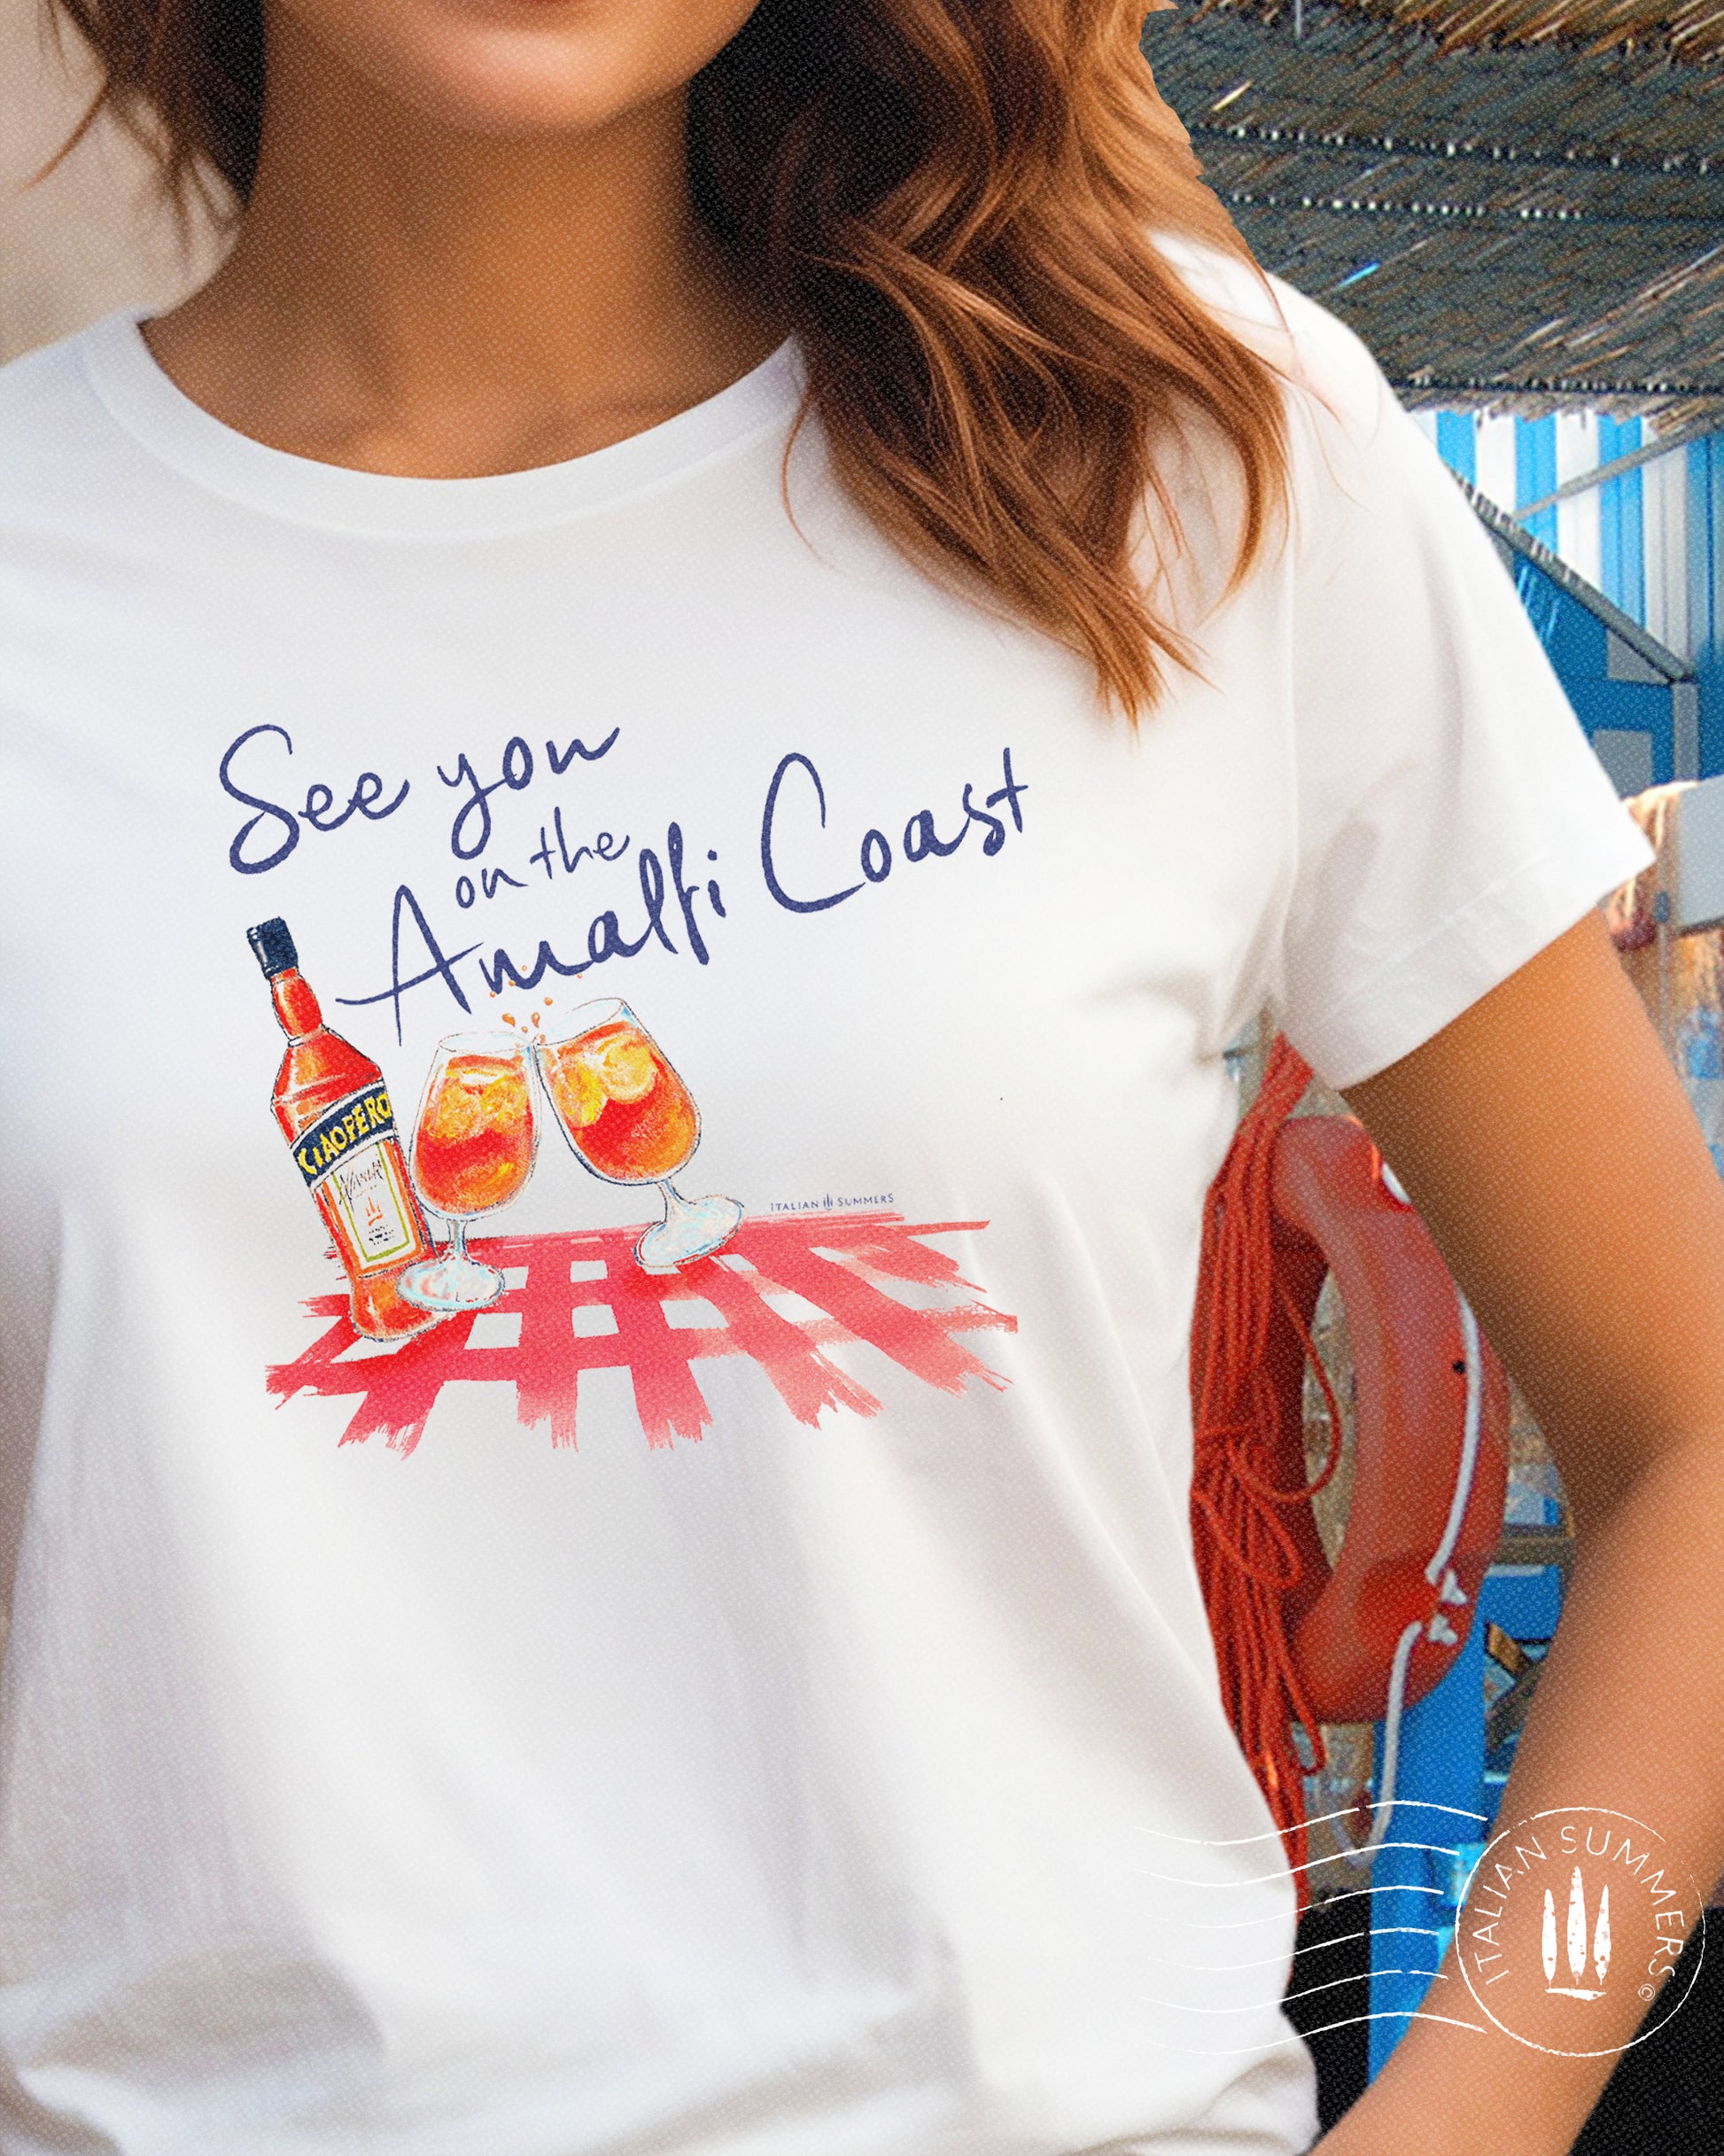 Italy inspired white t-shirt with the text See you on the Amalfi Coast in navy blue and a sketch in water color with an Aperol bottle and 2 glassis filled with Aperol Spritz on a bright red table cloth.